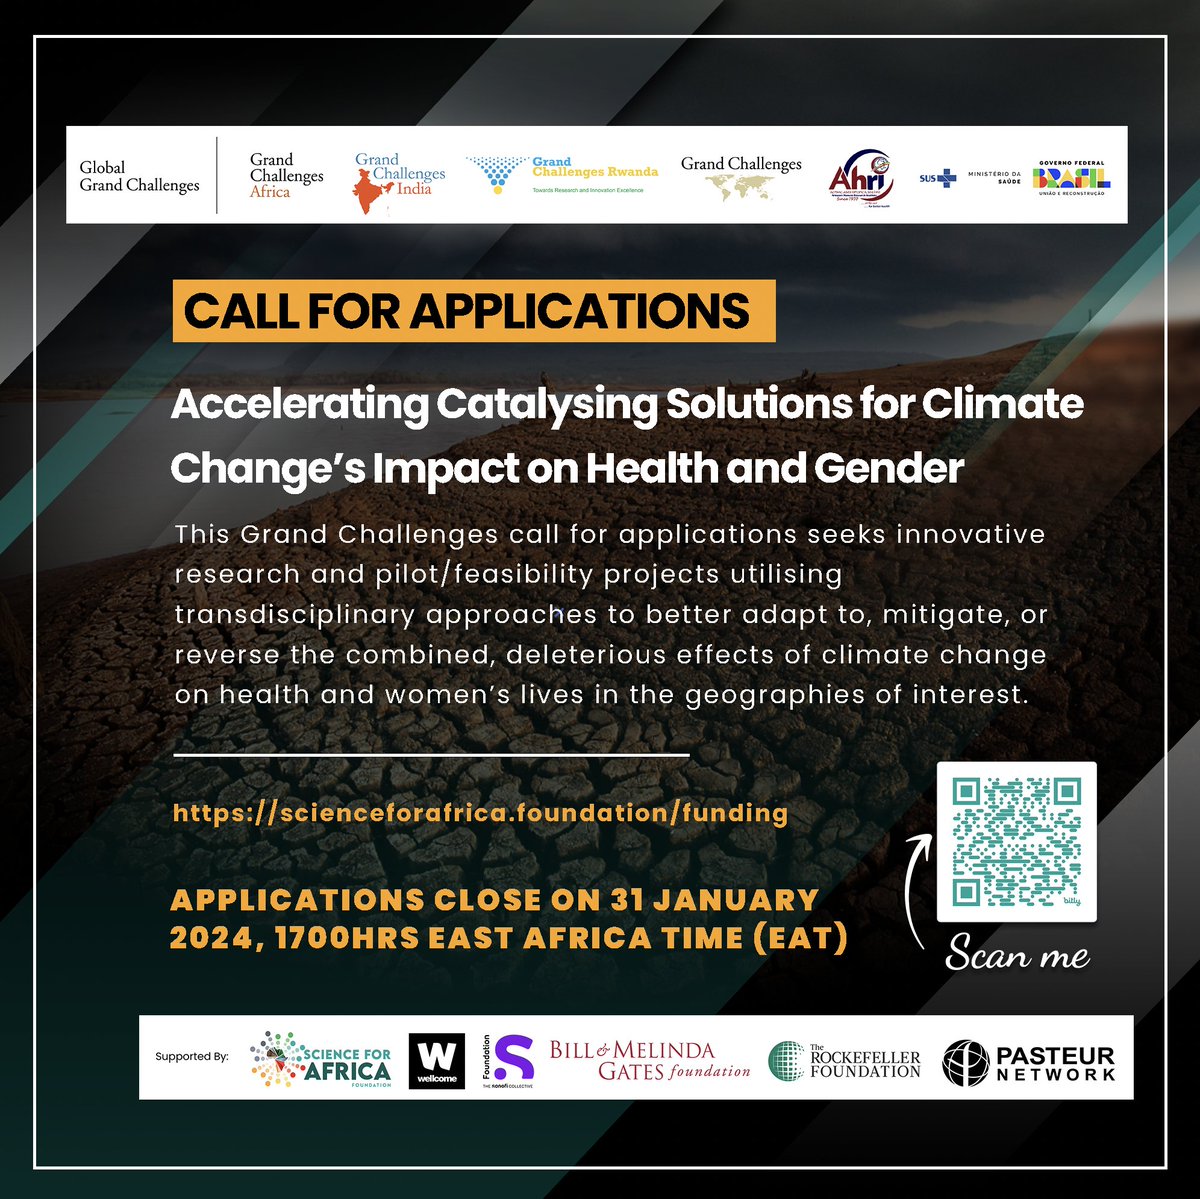 We invite innovators who will address climate change's impact on health, agriculture, and gender. Together, we are harnessing the power of science to address climate-related challenges. Interested? Find out how you can submit a proposal 🔗 bit.ly/3GoM9Og #ClimateChange